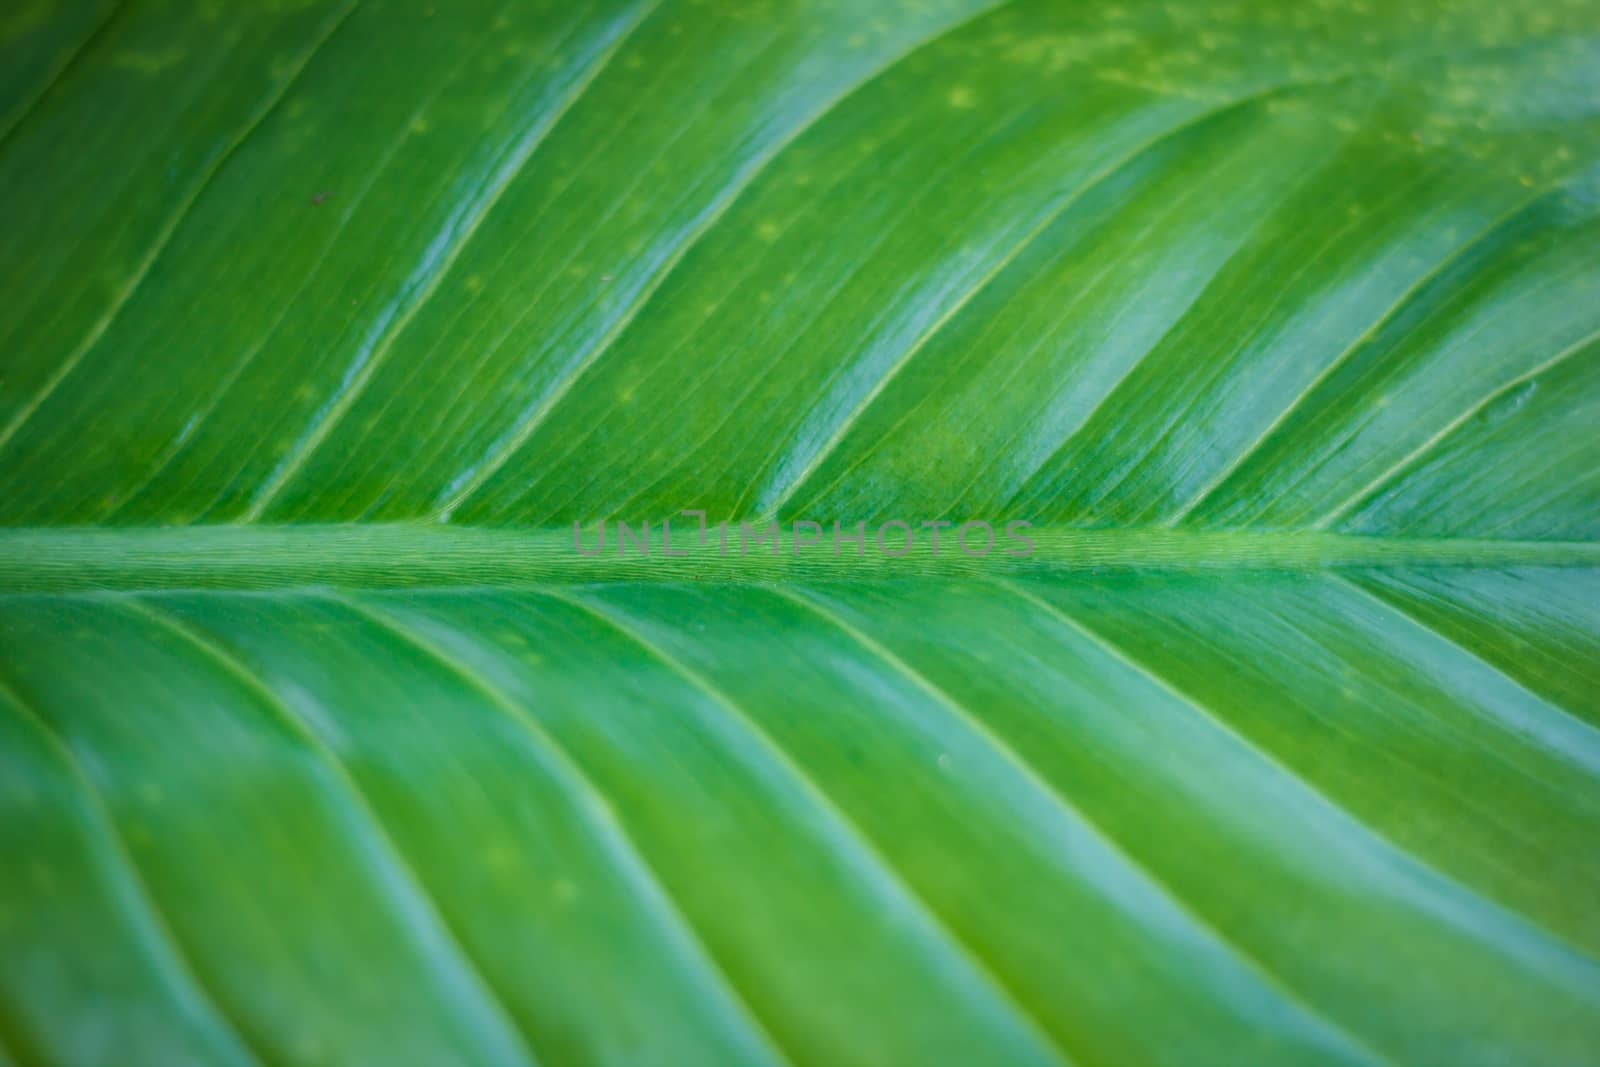 Texture of a green leaf as background by edlits